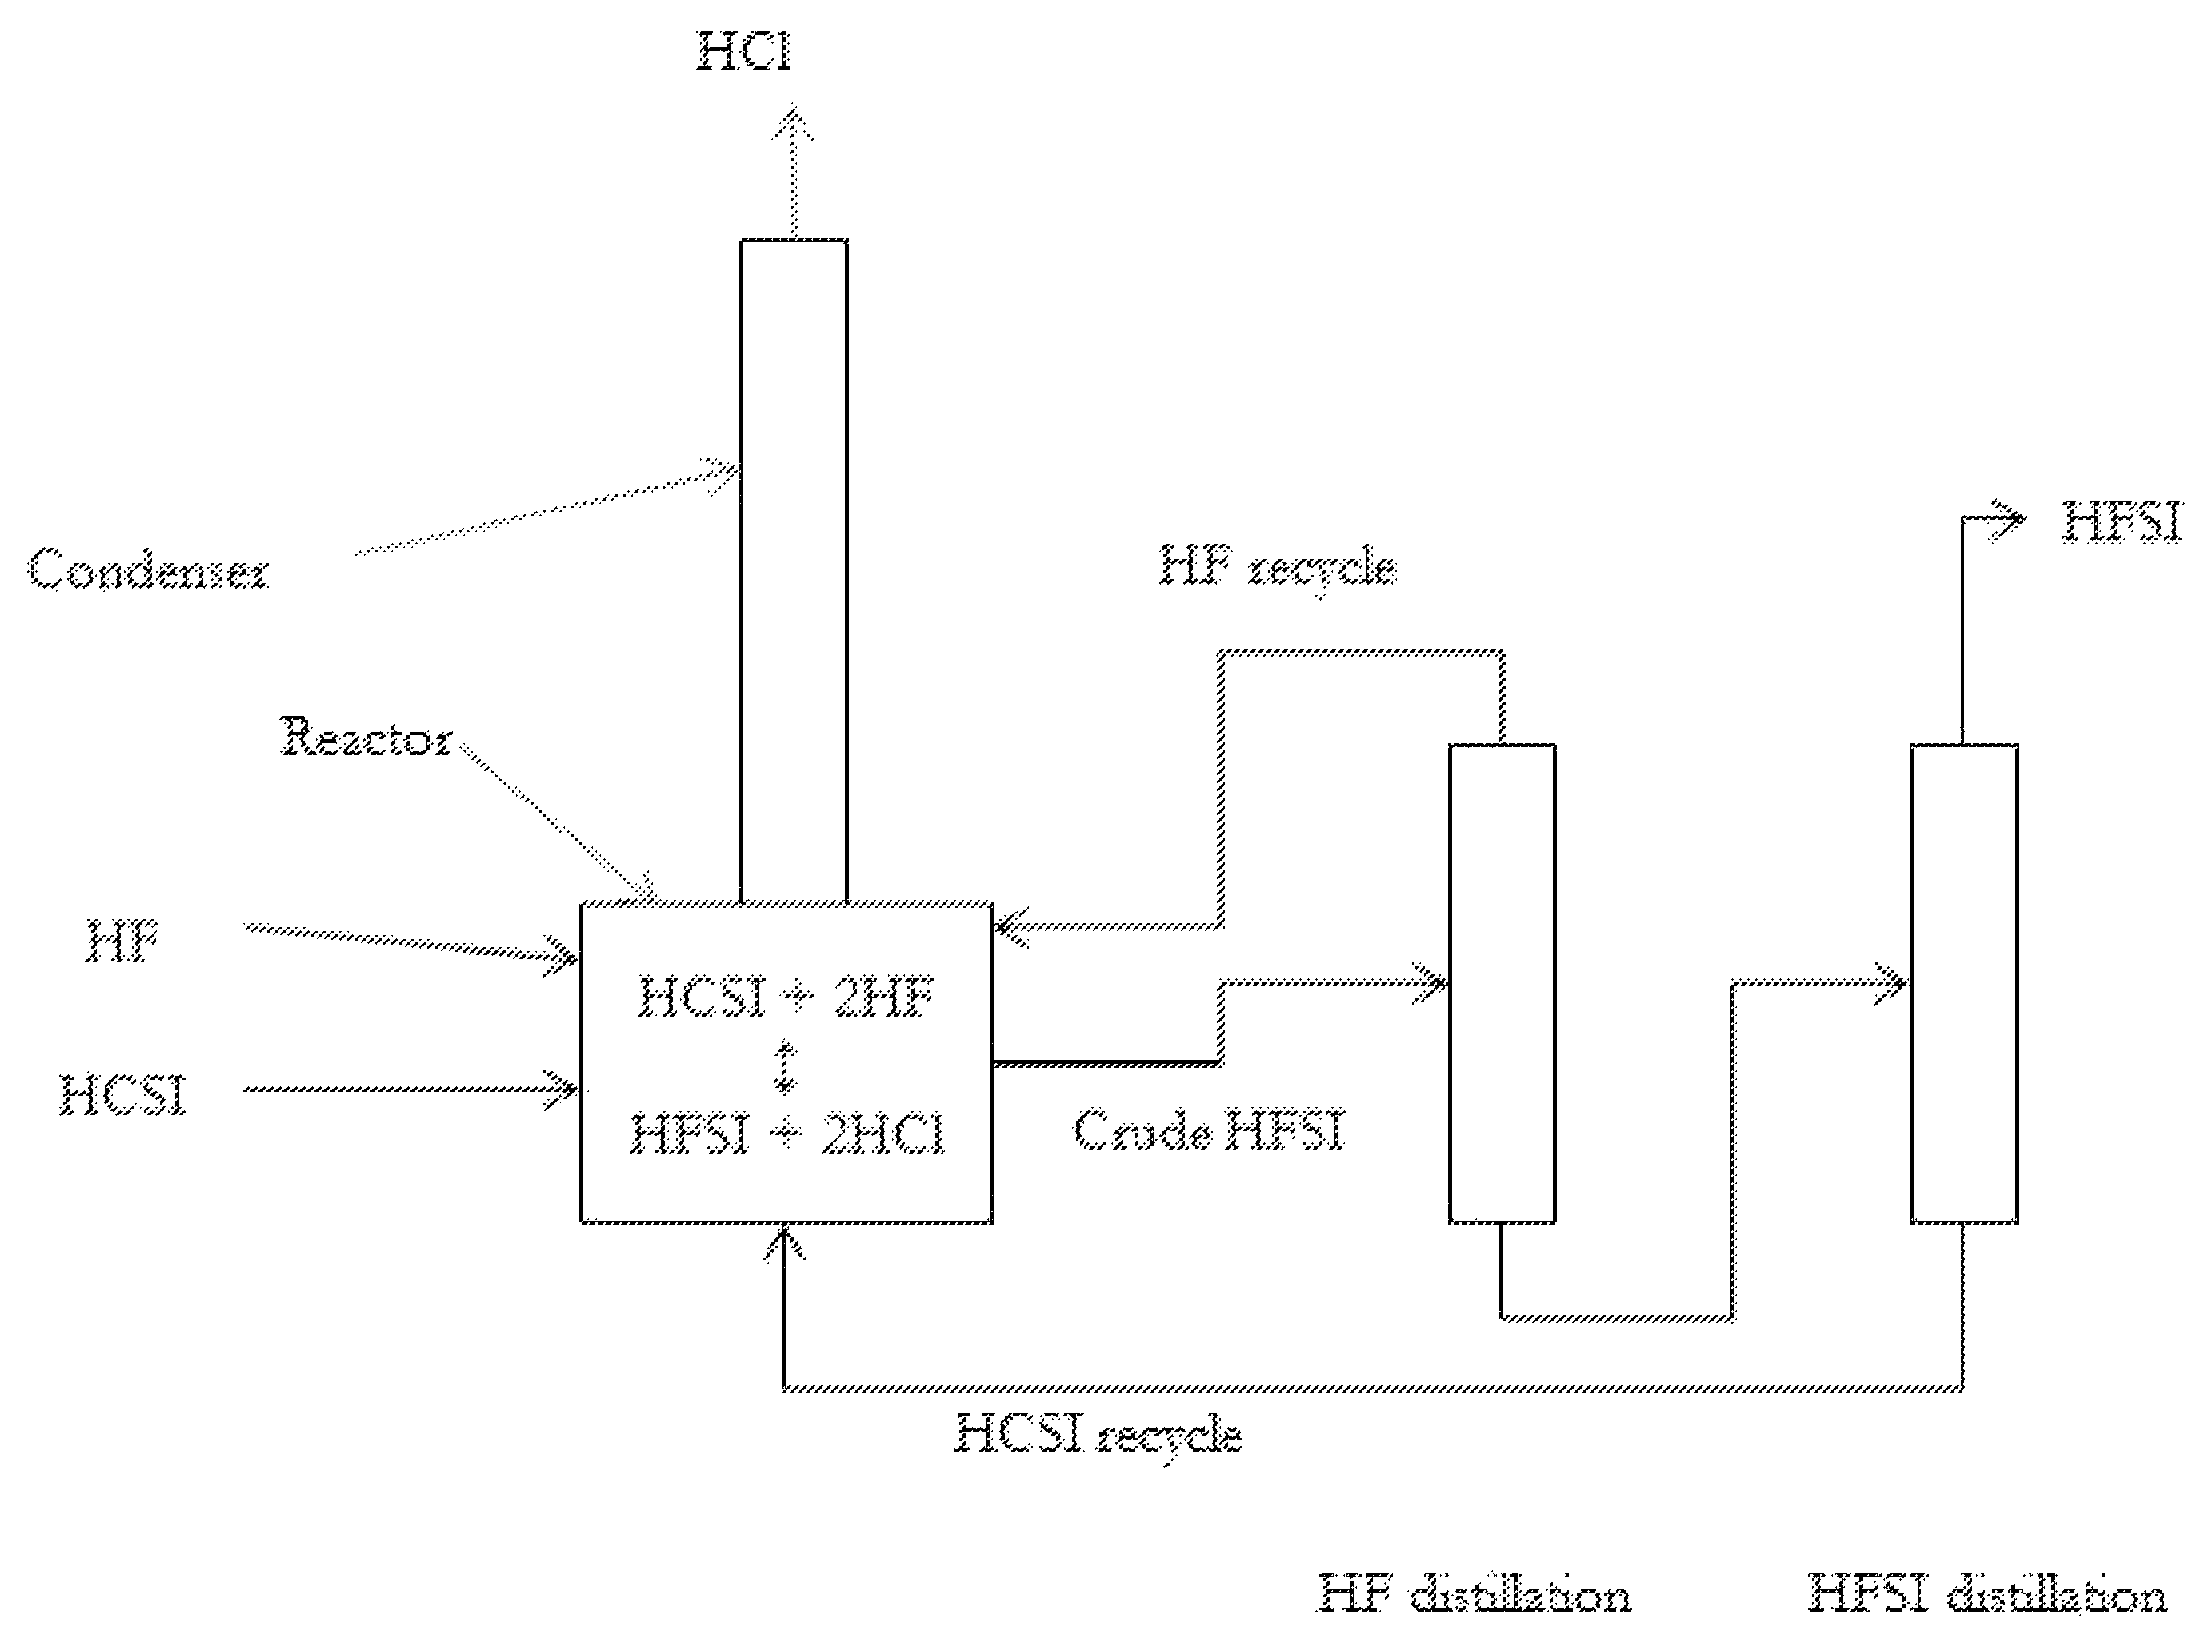 Synthesis of hydrogen bis(fluorosulfonyl)imide